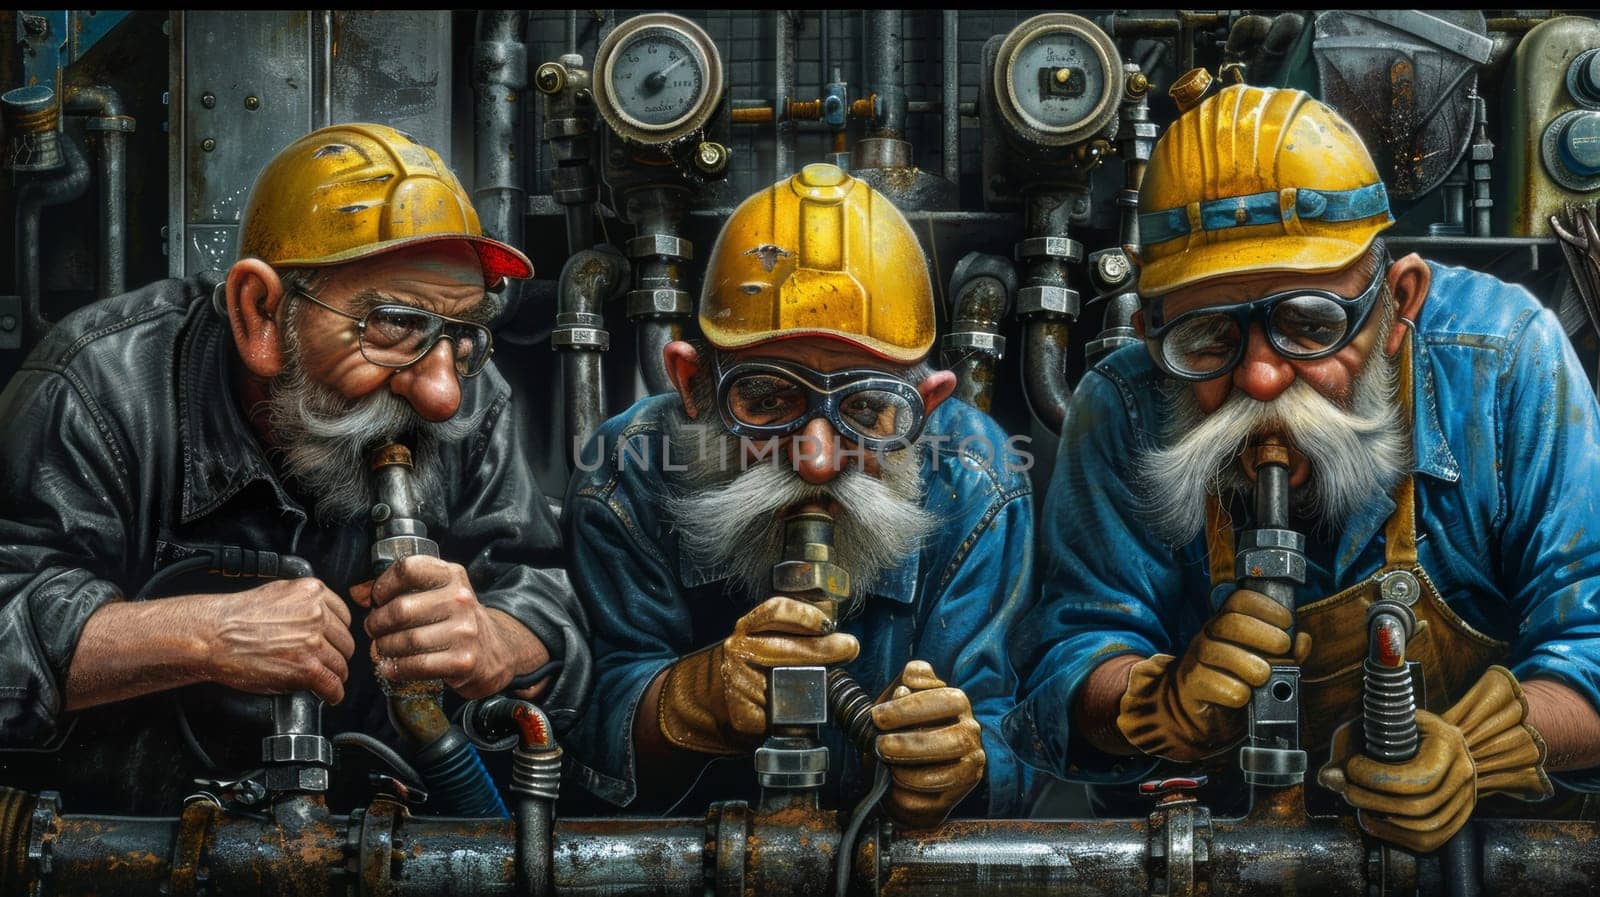 A painting of three men with hard hats and yellow safety vests, AI by starush